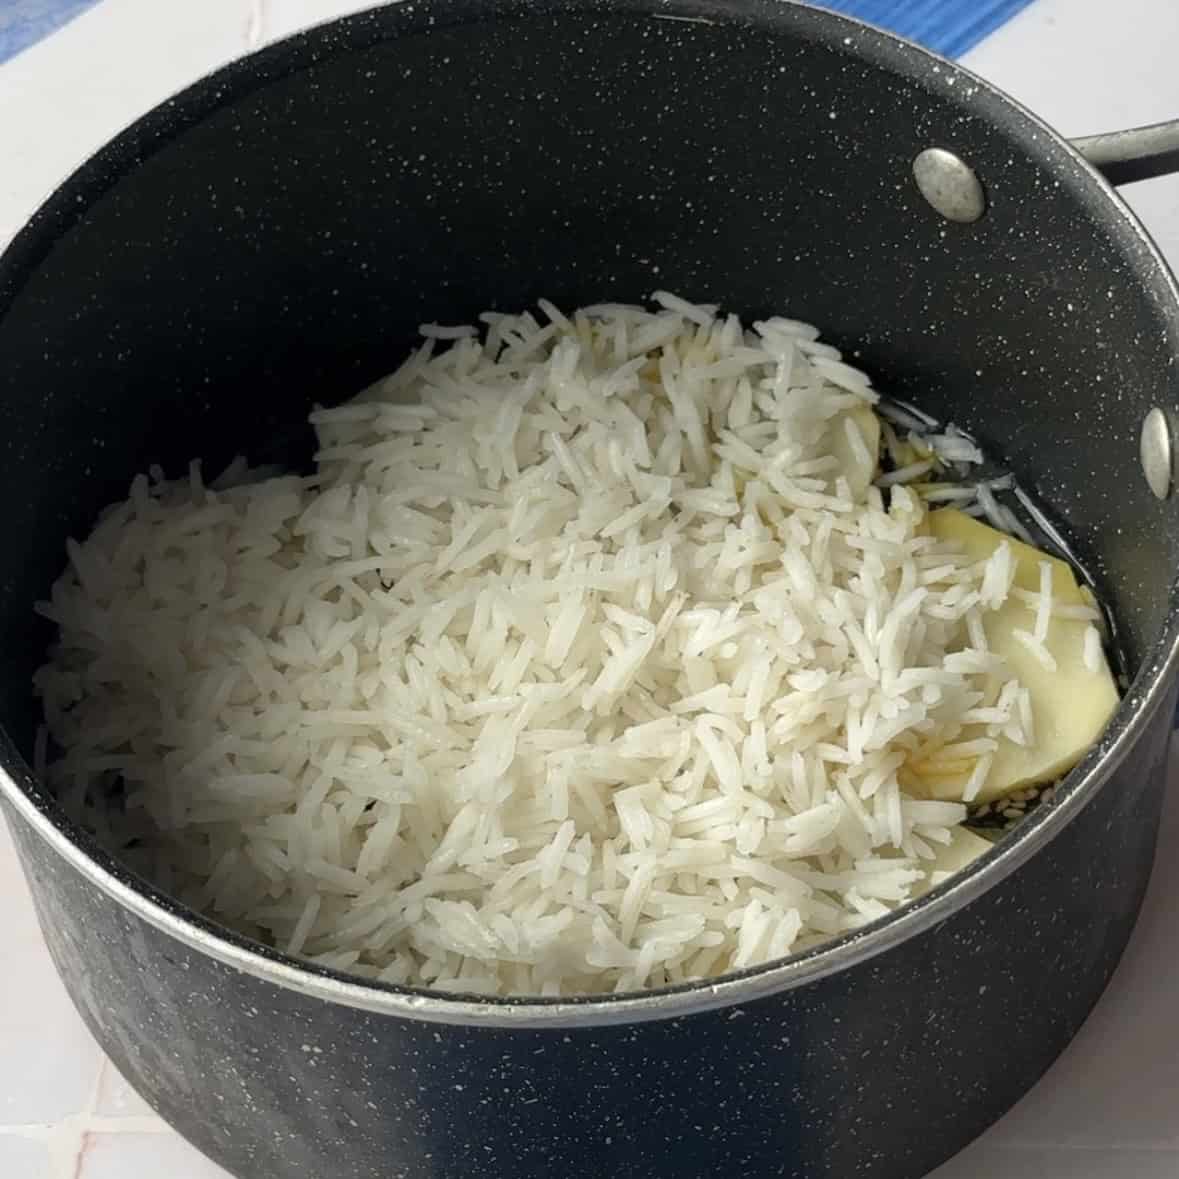 boiled rice placed on top of the potato slices in a mount shape